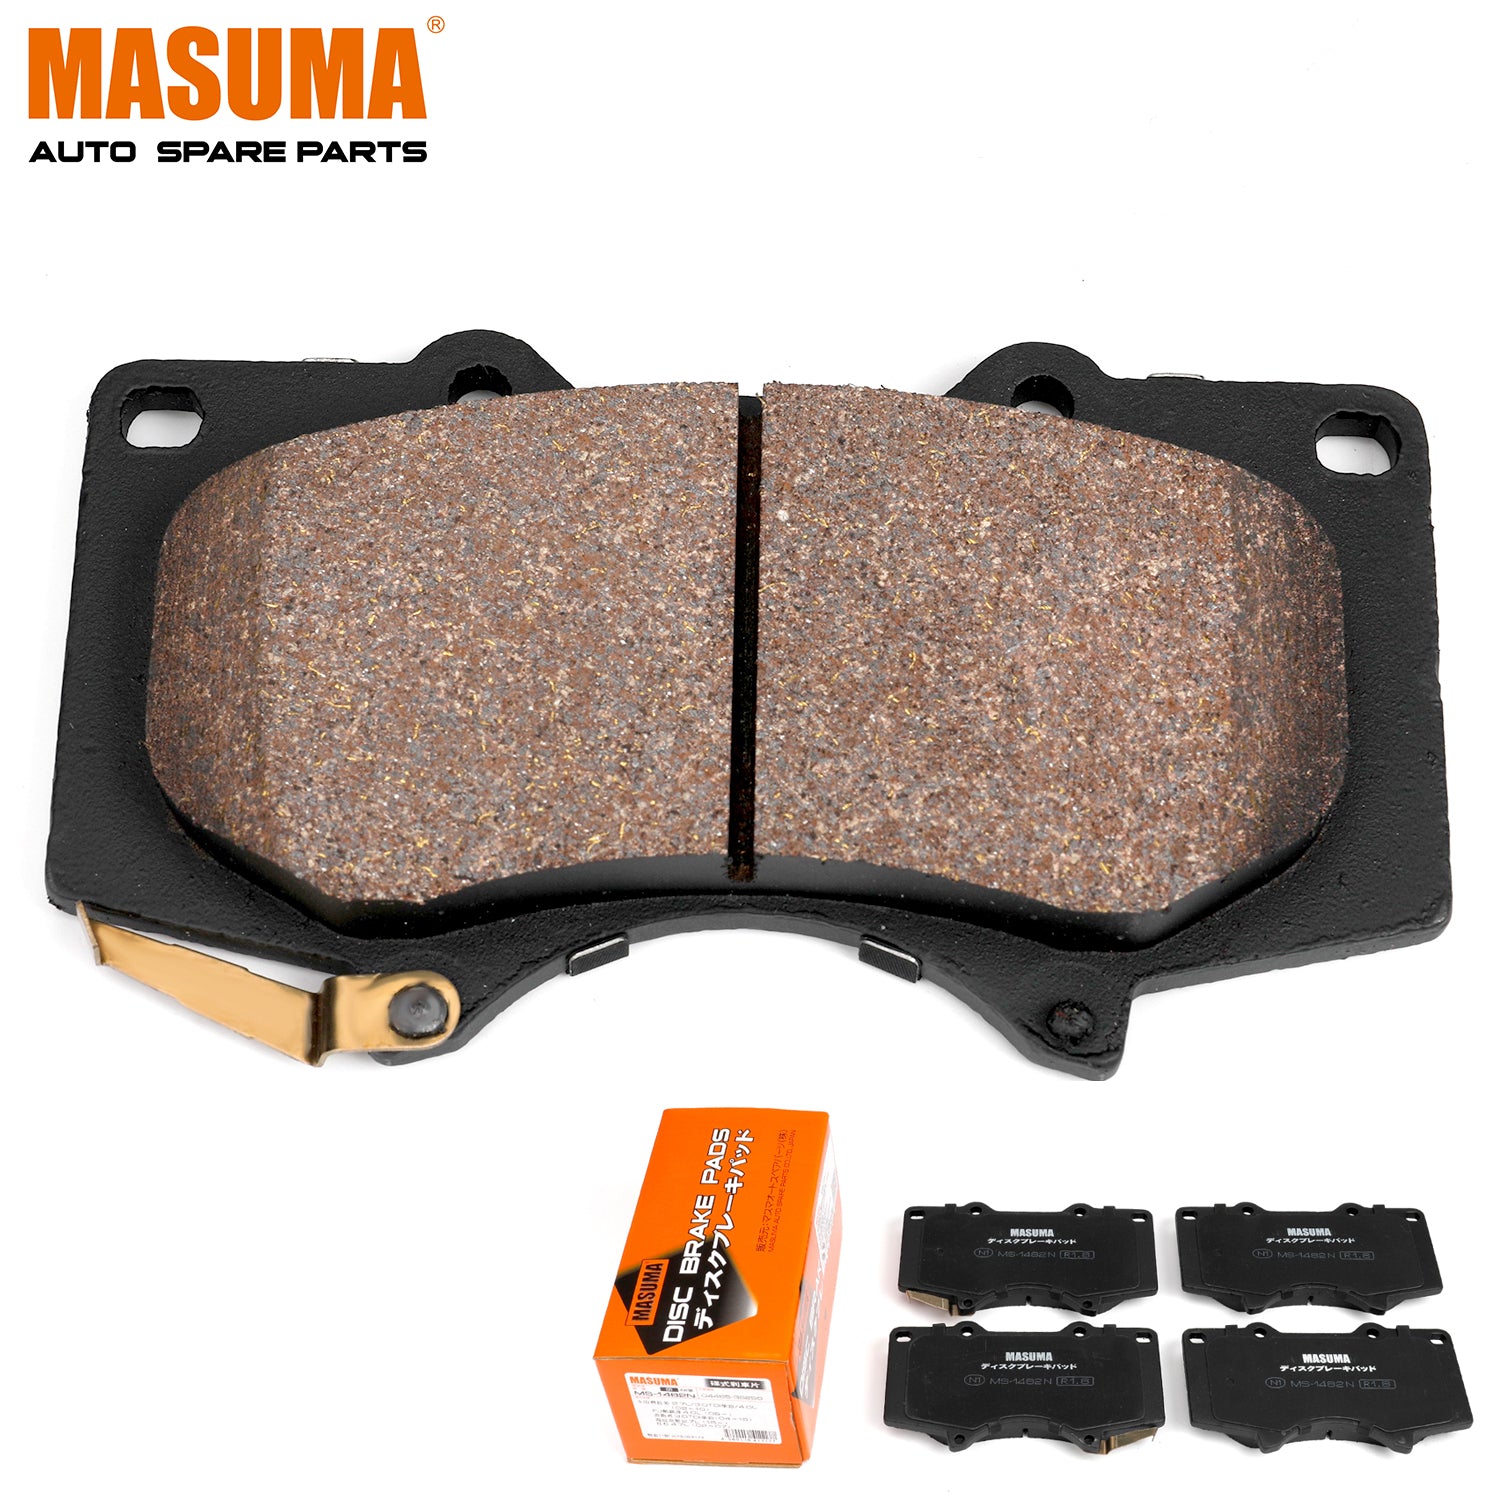 MS-1482X Auto spare parts Automotive brake system brake pad for Japanese cars